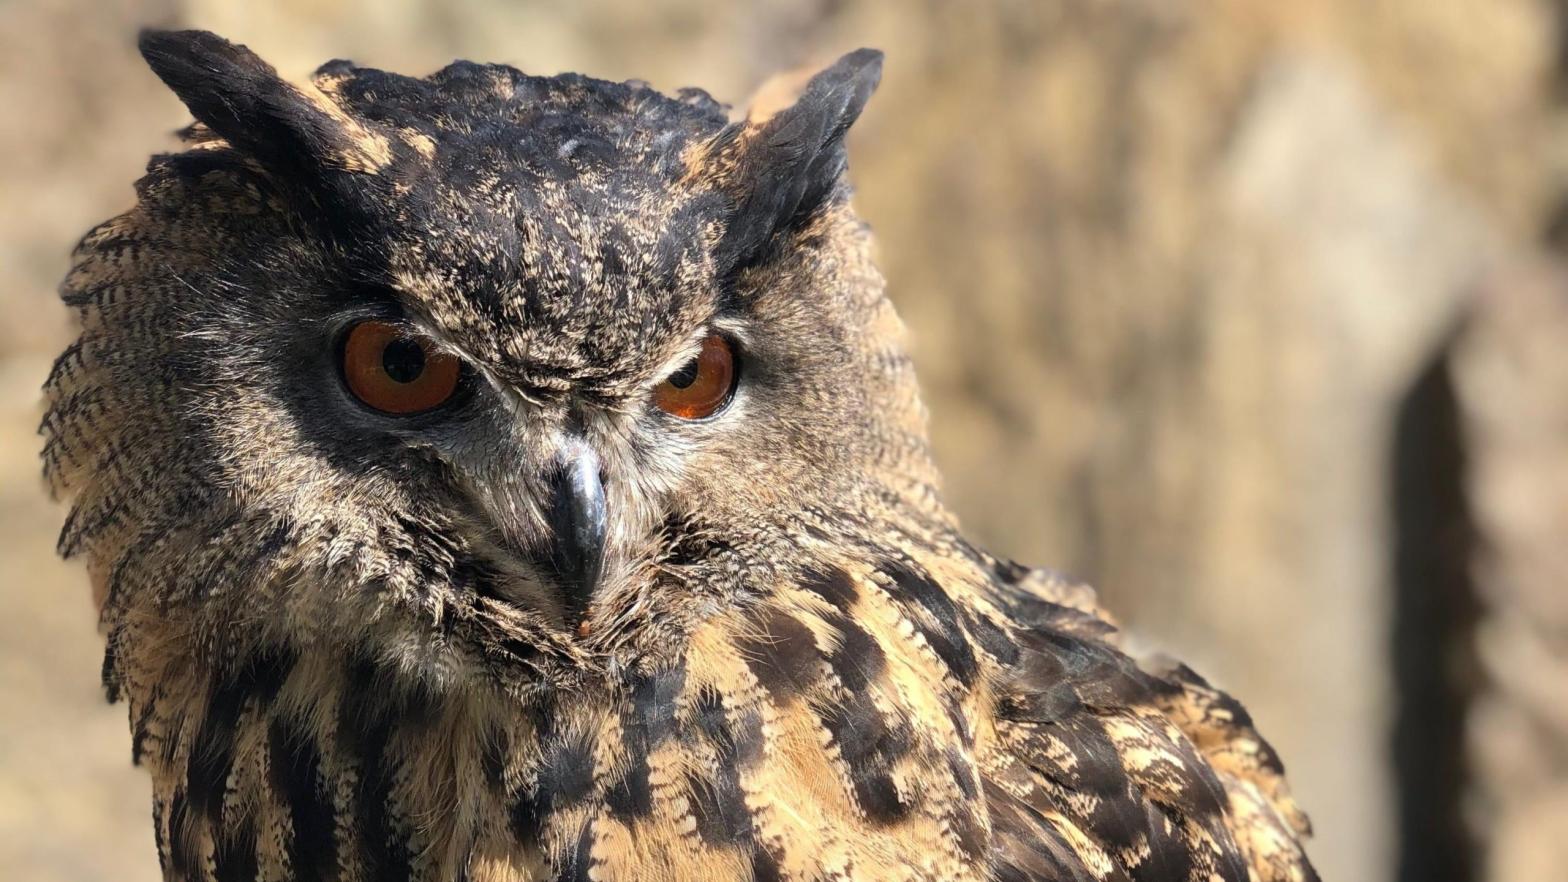 This is Gladys, a Eurasian eagle owl. She escaped from the Minnesota Zoo in early October. (Photo: Minnesota Zoo)